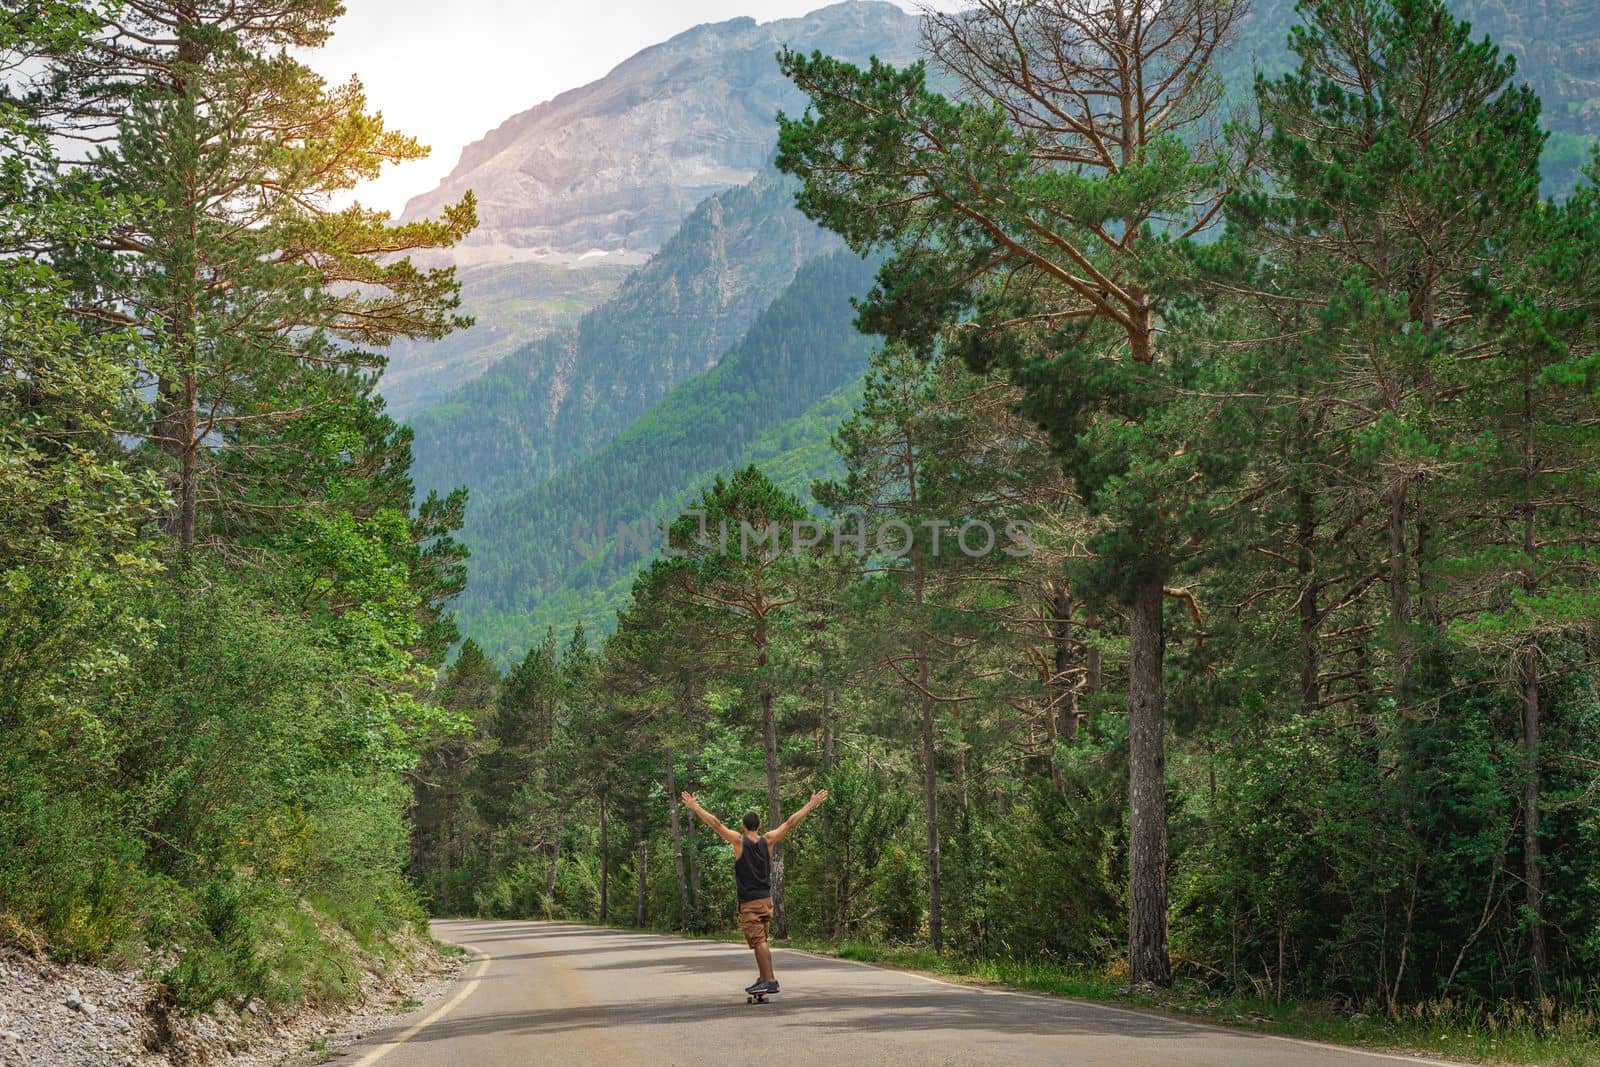 Hipster guy with long board with open arms enjoying life in the middle of a mountain road and a beautiful landscape. by PaulCarr